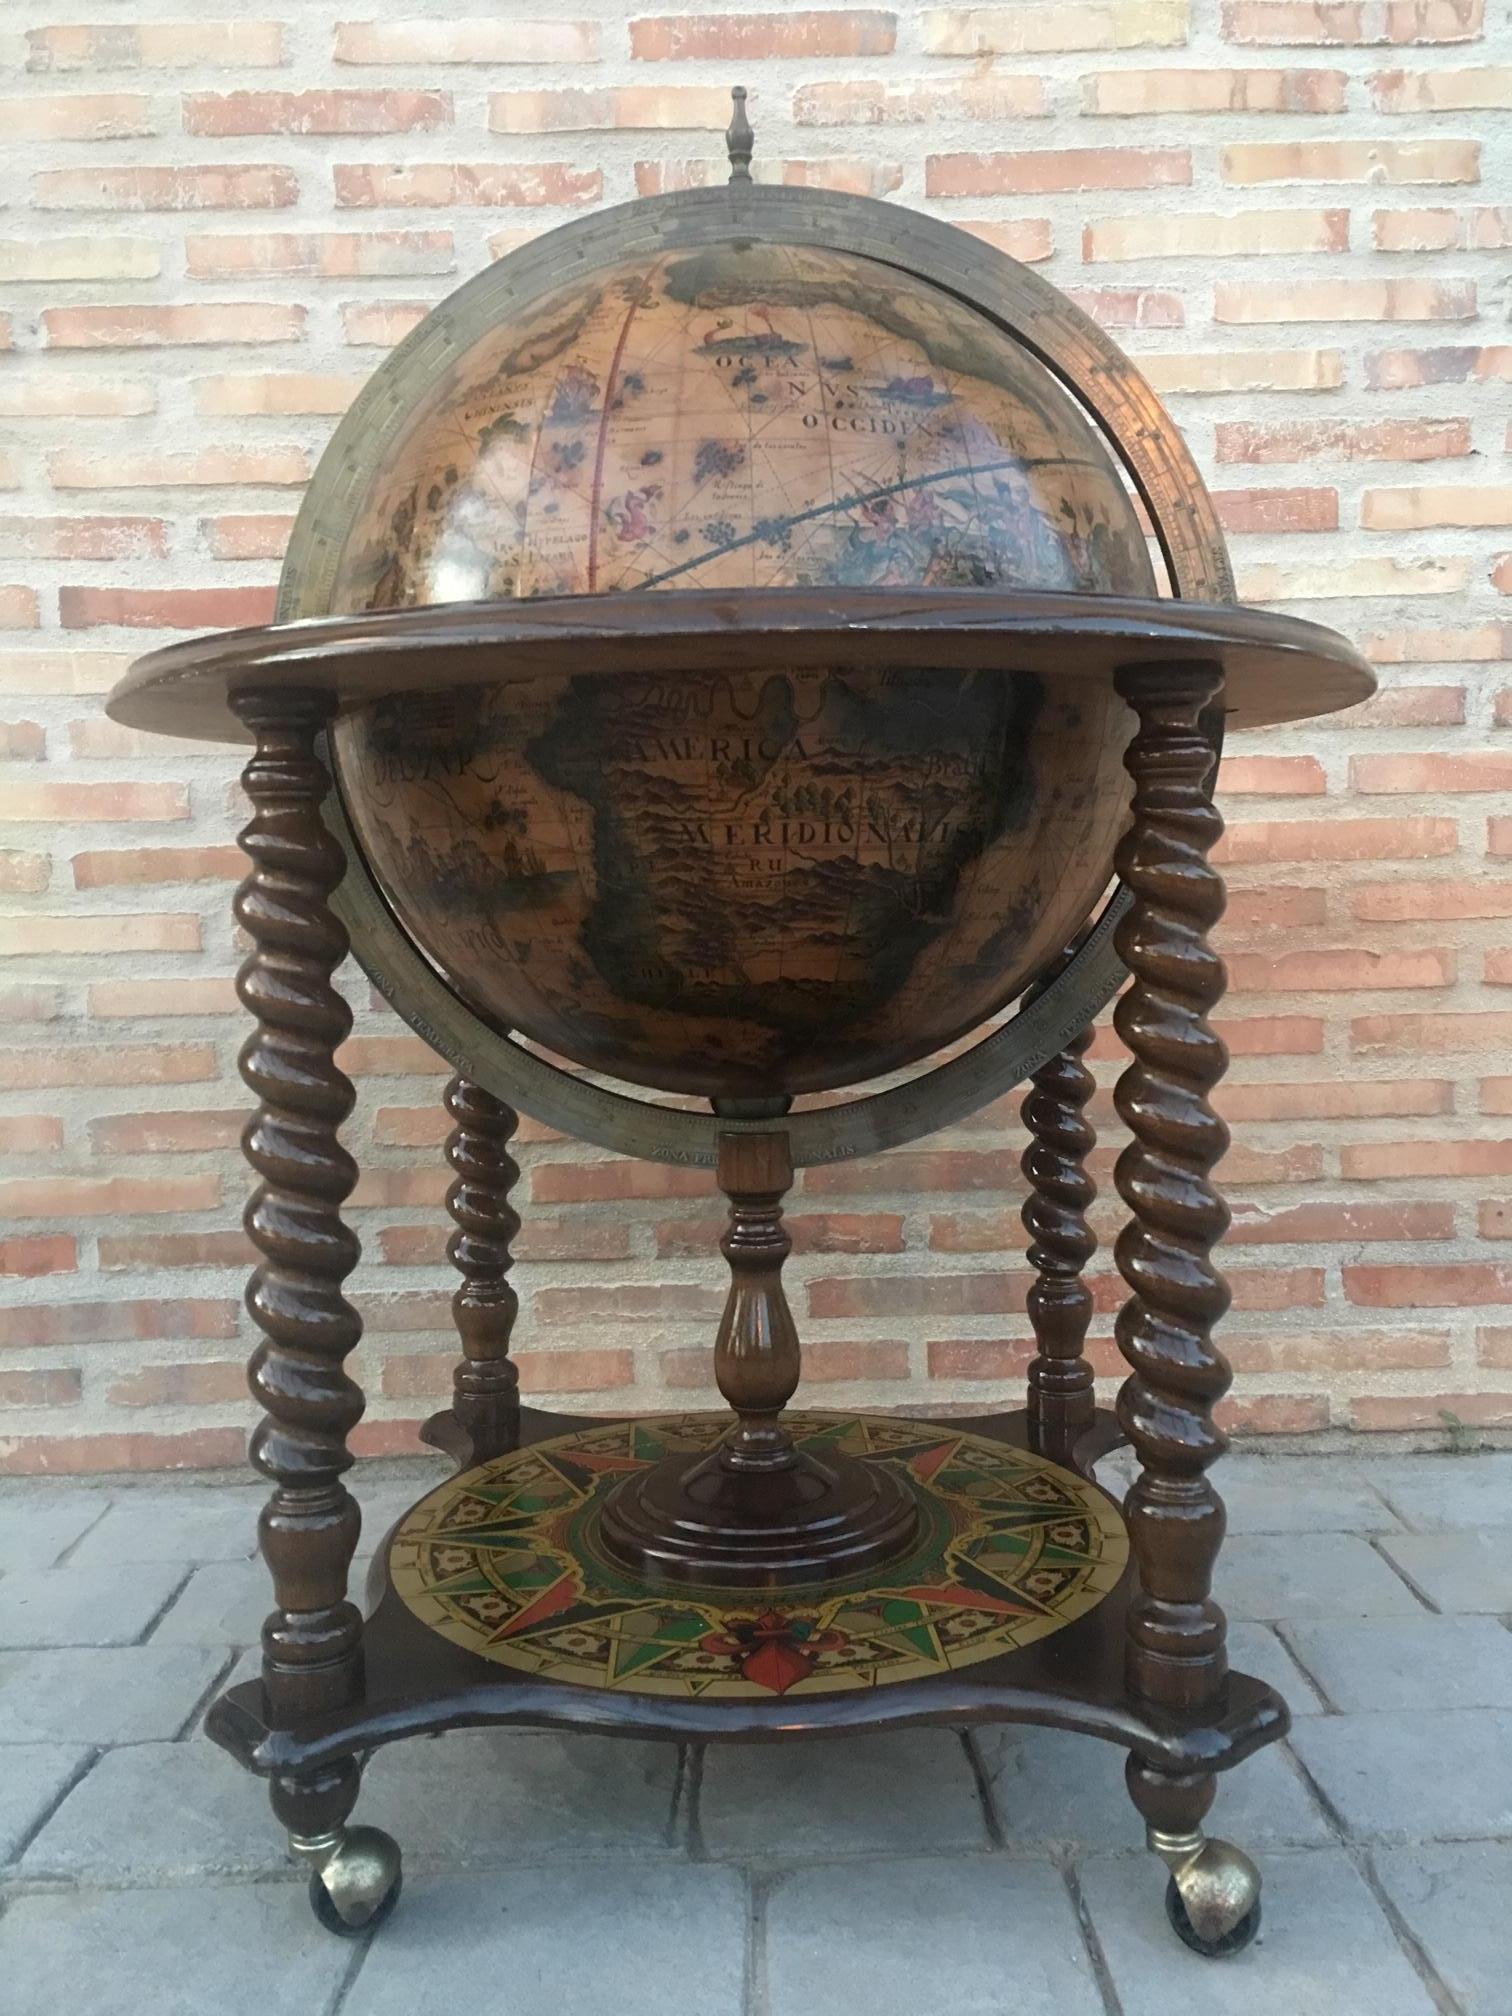 This is a modernist midcentury cocktail drinks cabinet in the form of a globe, circa 1920 in date.

The hinged top section opens to reveal a fitted interior with spaces for glasses and a ice bucket. 

The exterior of the globe has the map of the